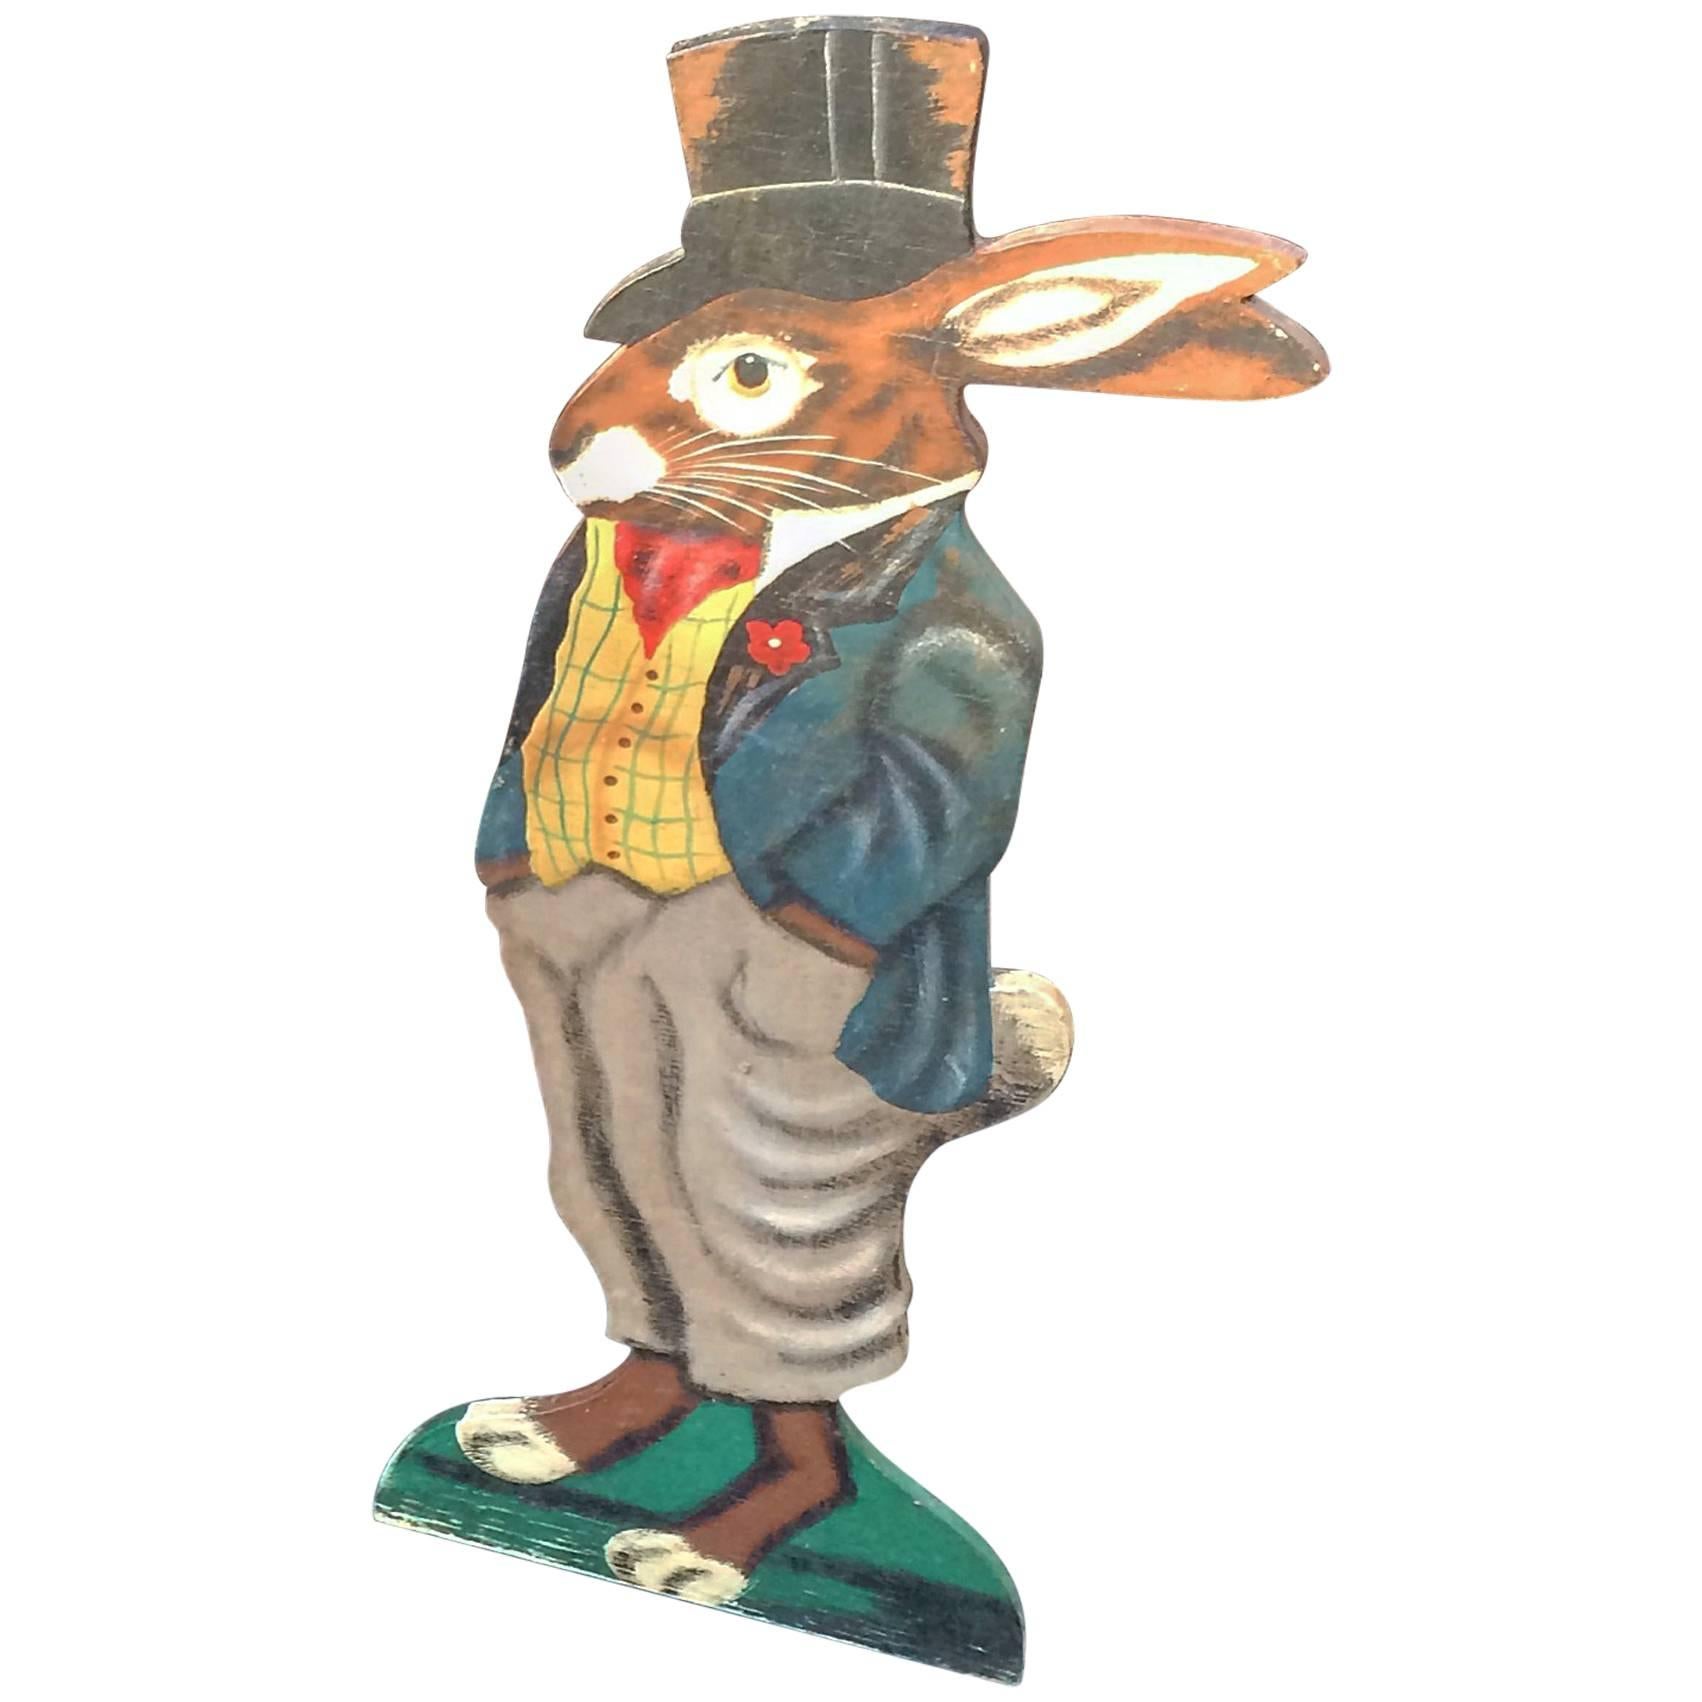 Painted wood cut-out figure of a dapper hare. (Dummy Board)